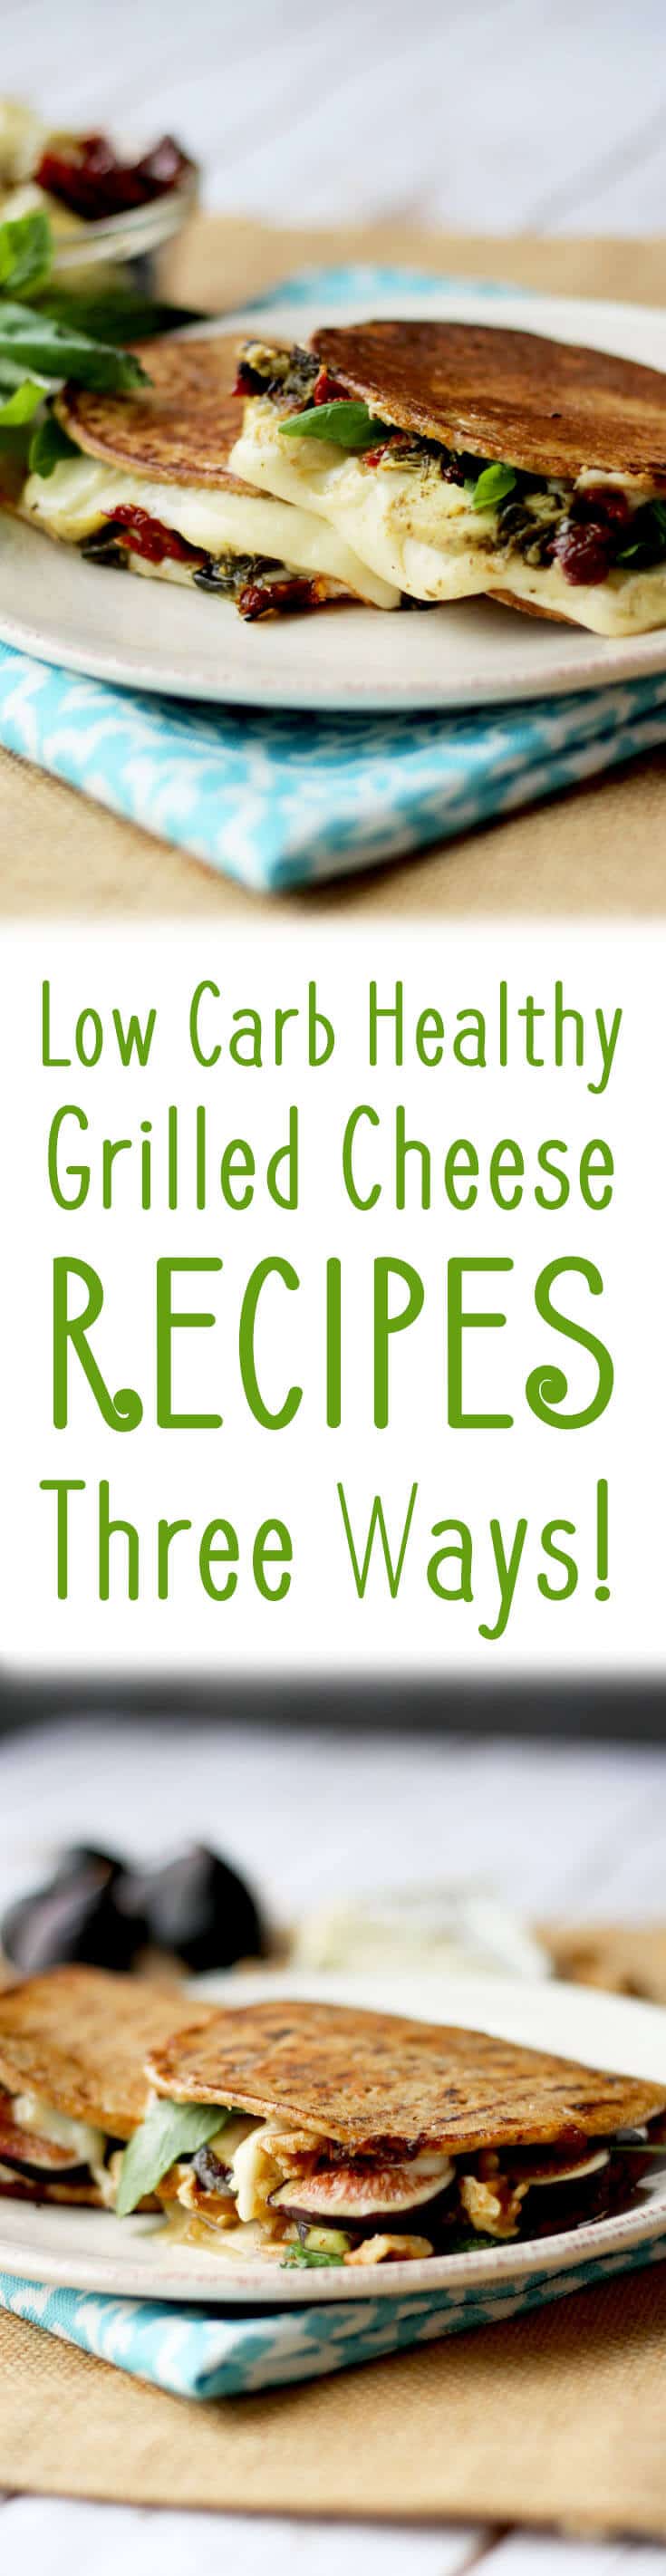 These three low carb healthy grilled cheese recipes will help you get your cheese fix without the carb load! Bring on the cheese, lovelies!